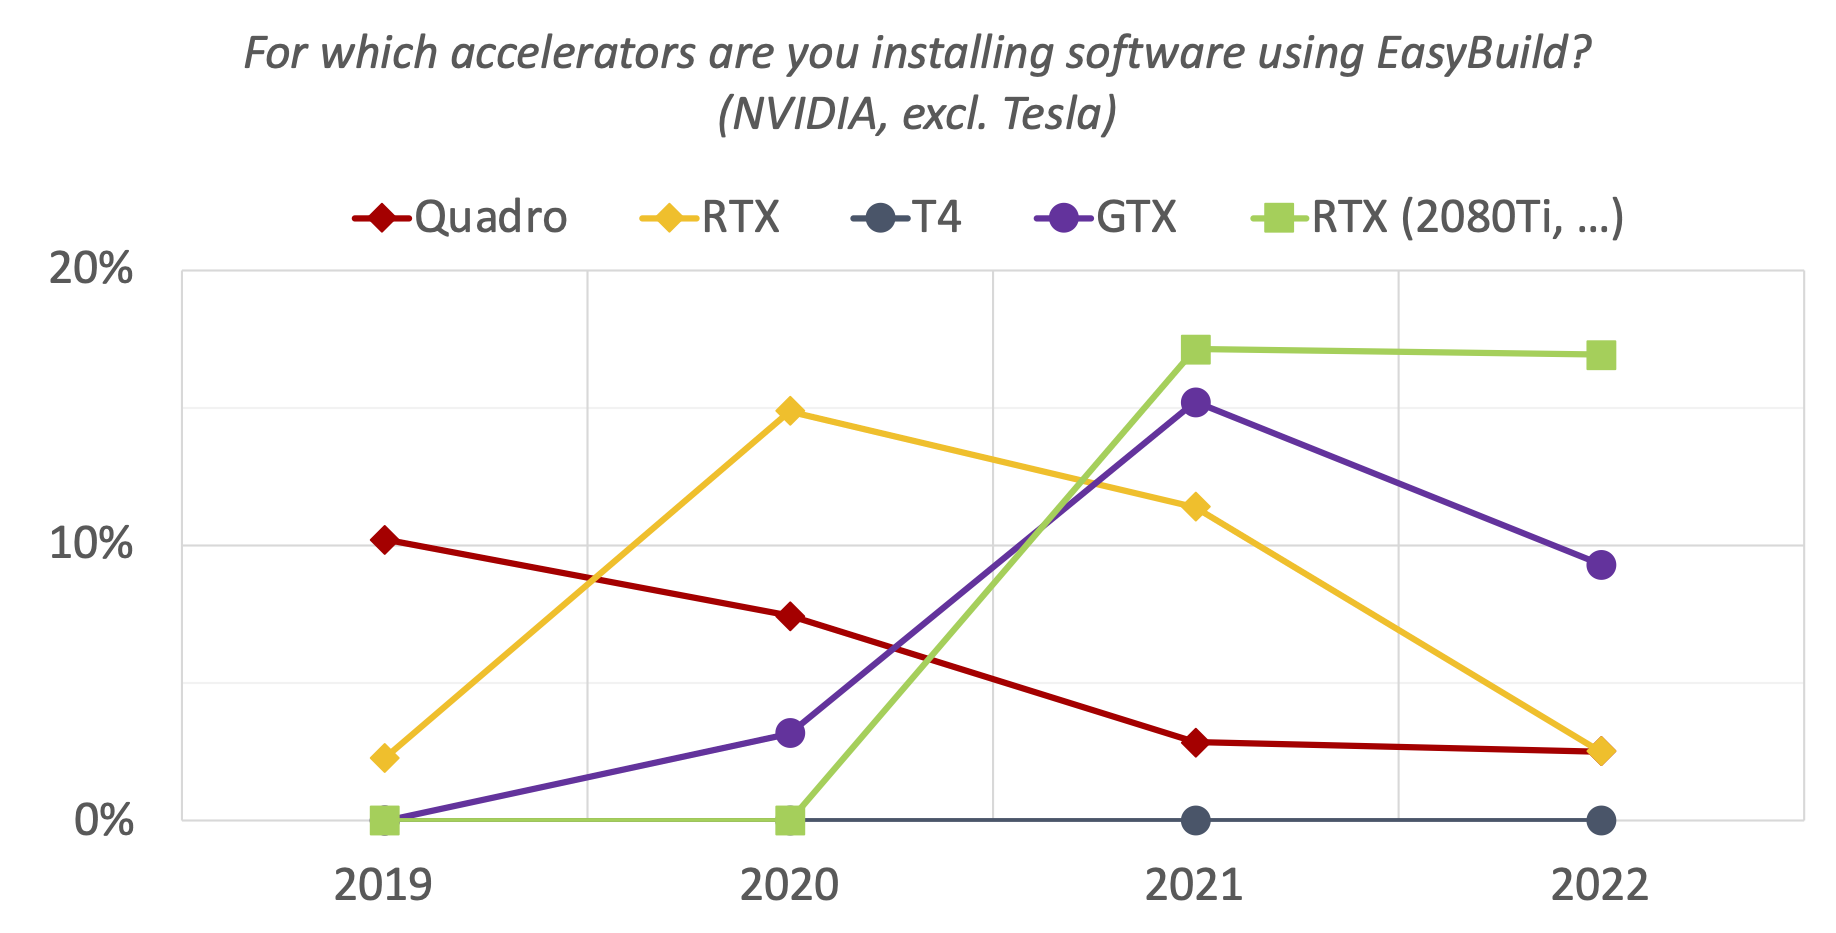 16. For which accelerators are you installing software using EasyBuild? (NVIDIA, excl. Tesla)